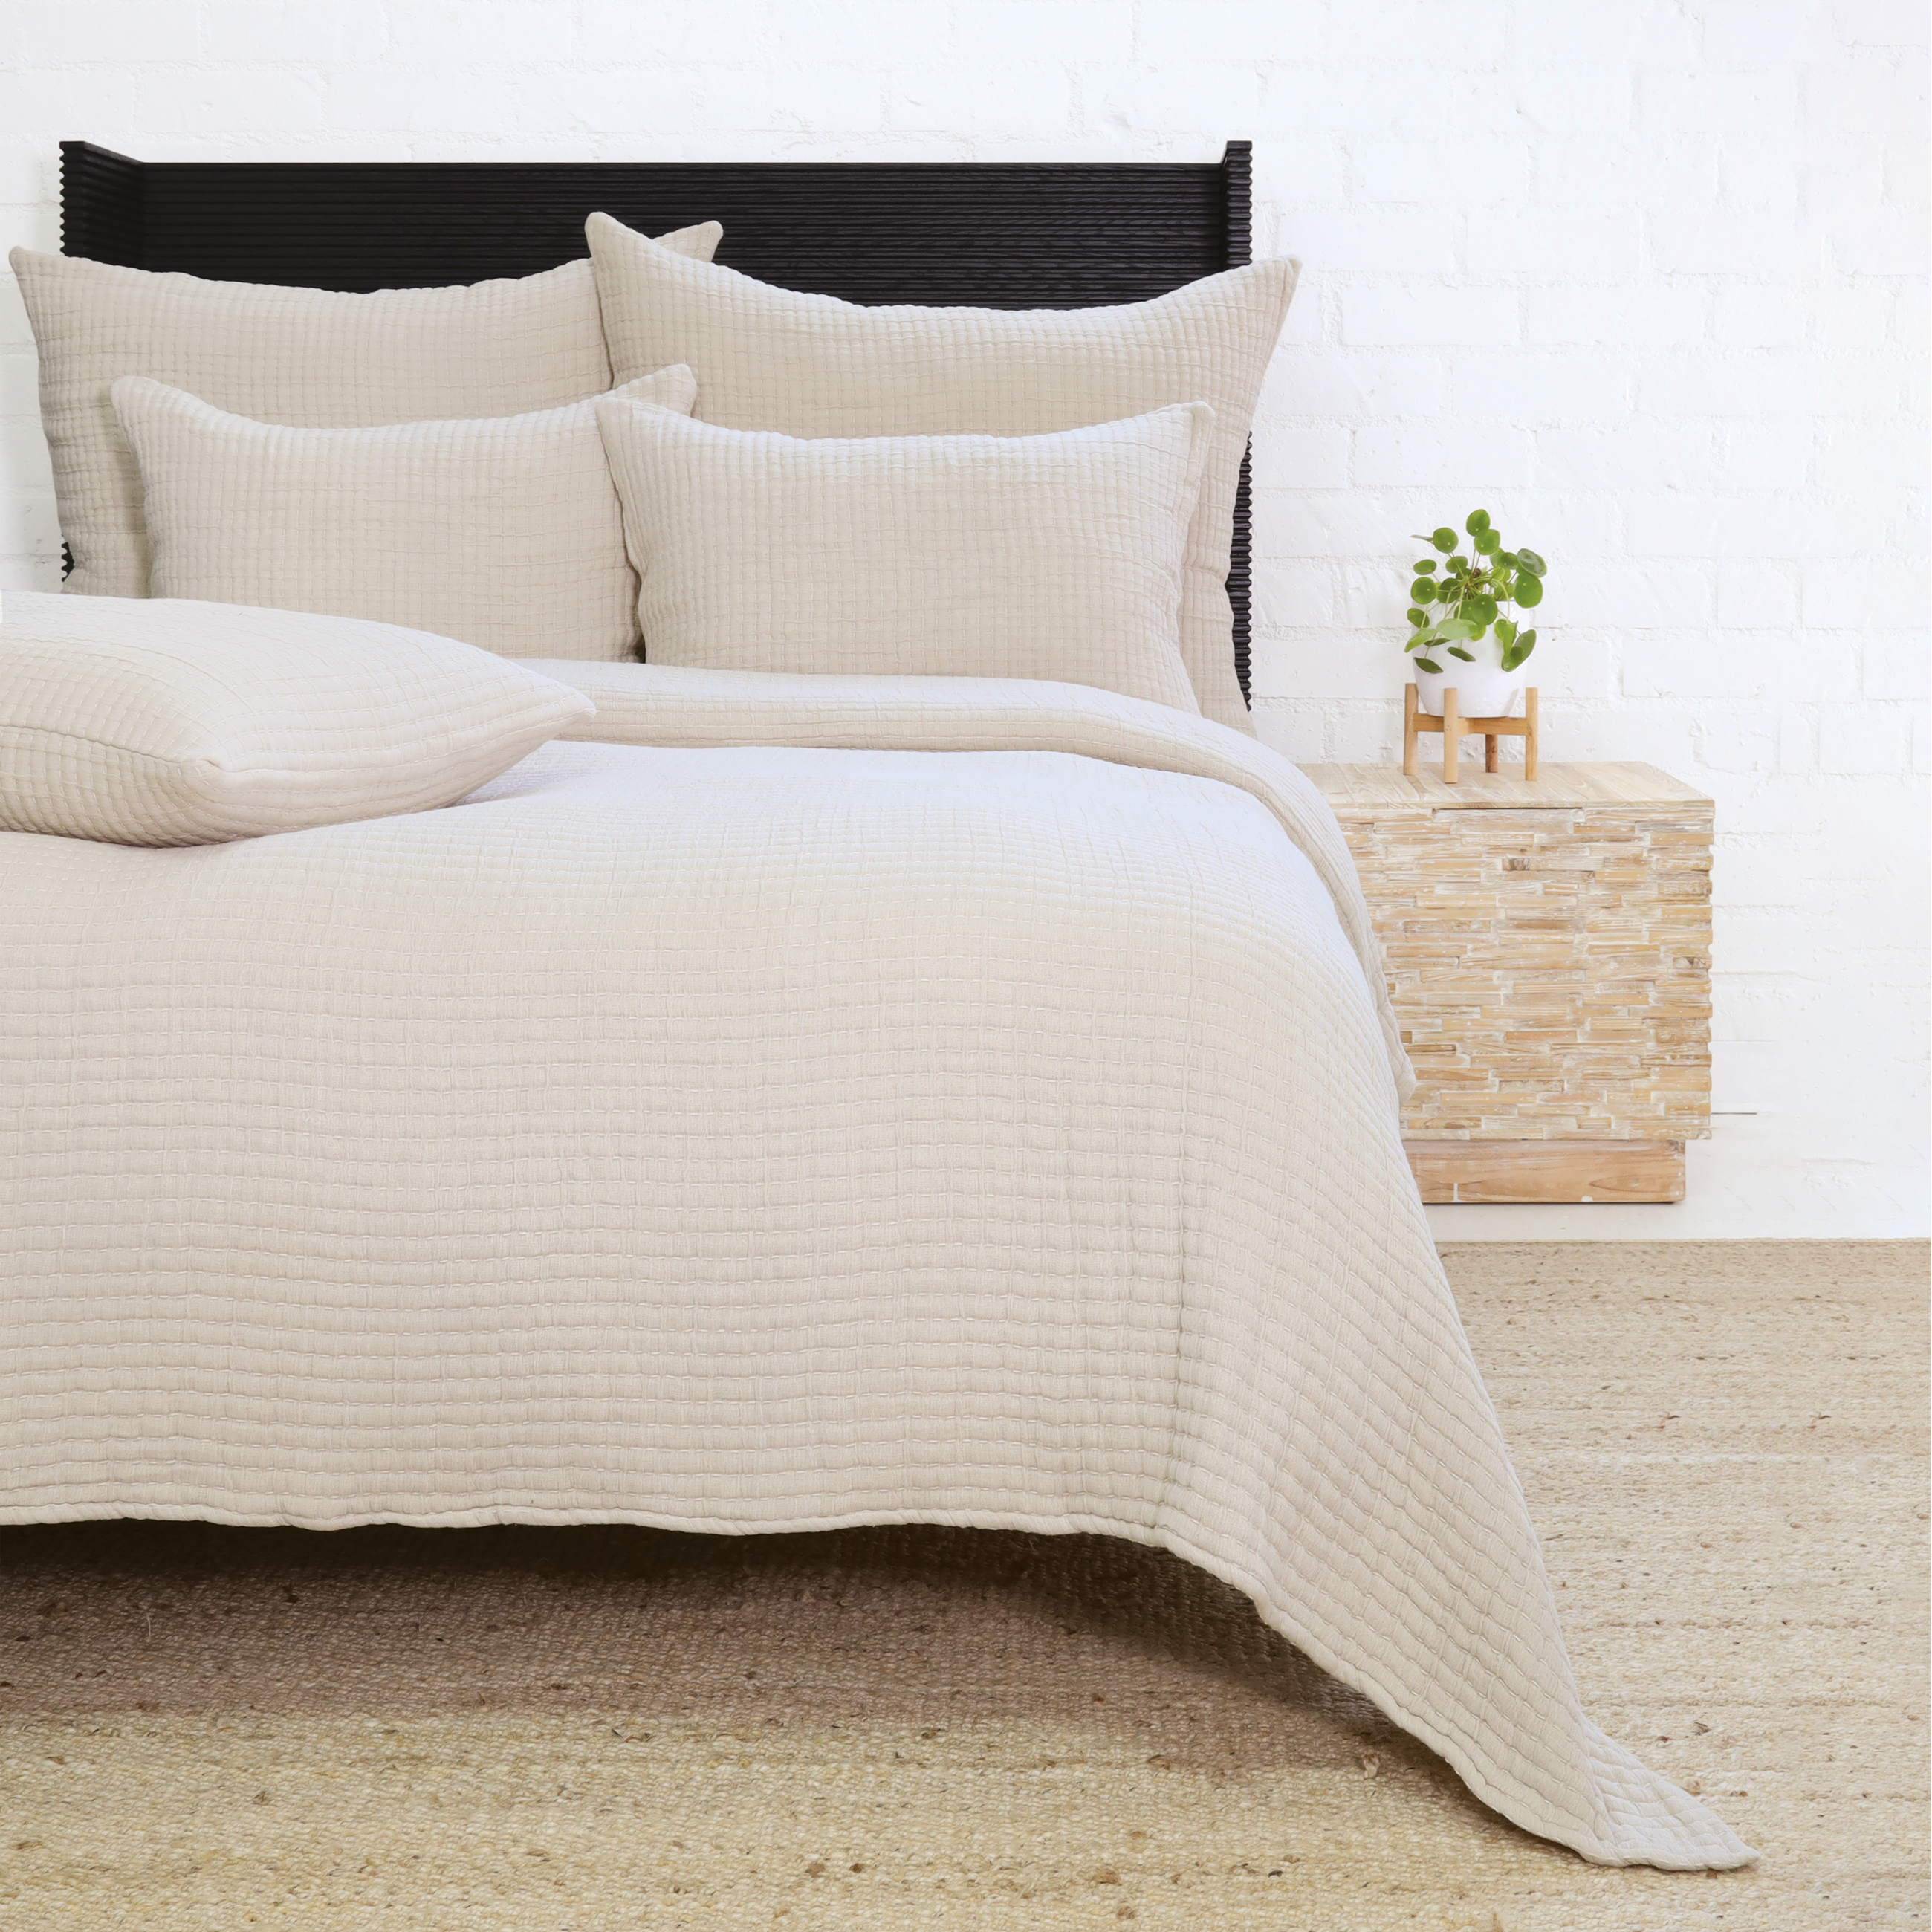 Add textural interest to your bed with the Vancouver Coverlet collection. Made of a lightweight stonewashed cotton gauze with an interwoven ivory stripe, it is the perfect addition to your bed to create a relaxing space. Amethyst Home provides interior design, new construction, custom furniture, and area rugs in the Nashville metro area.